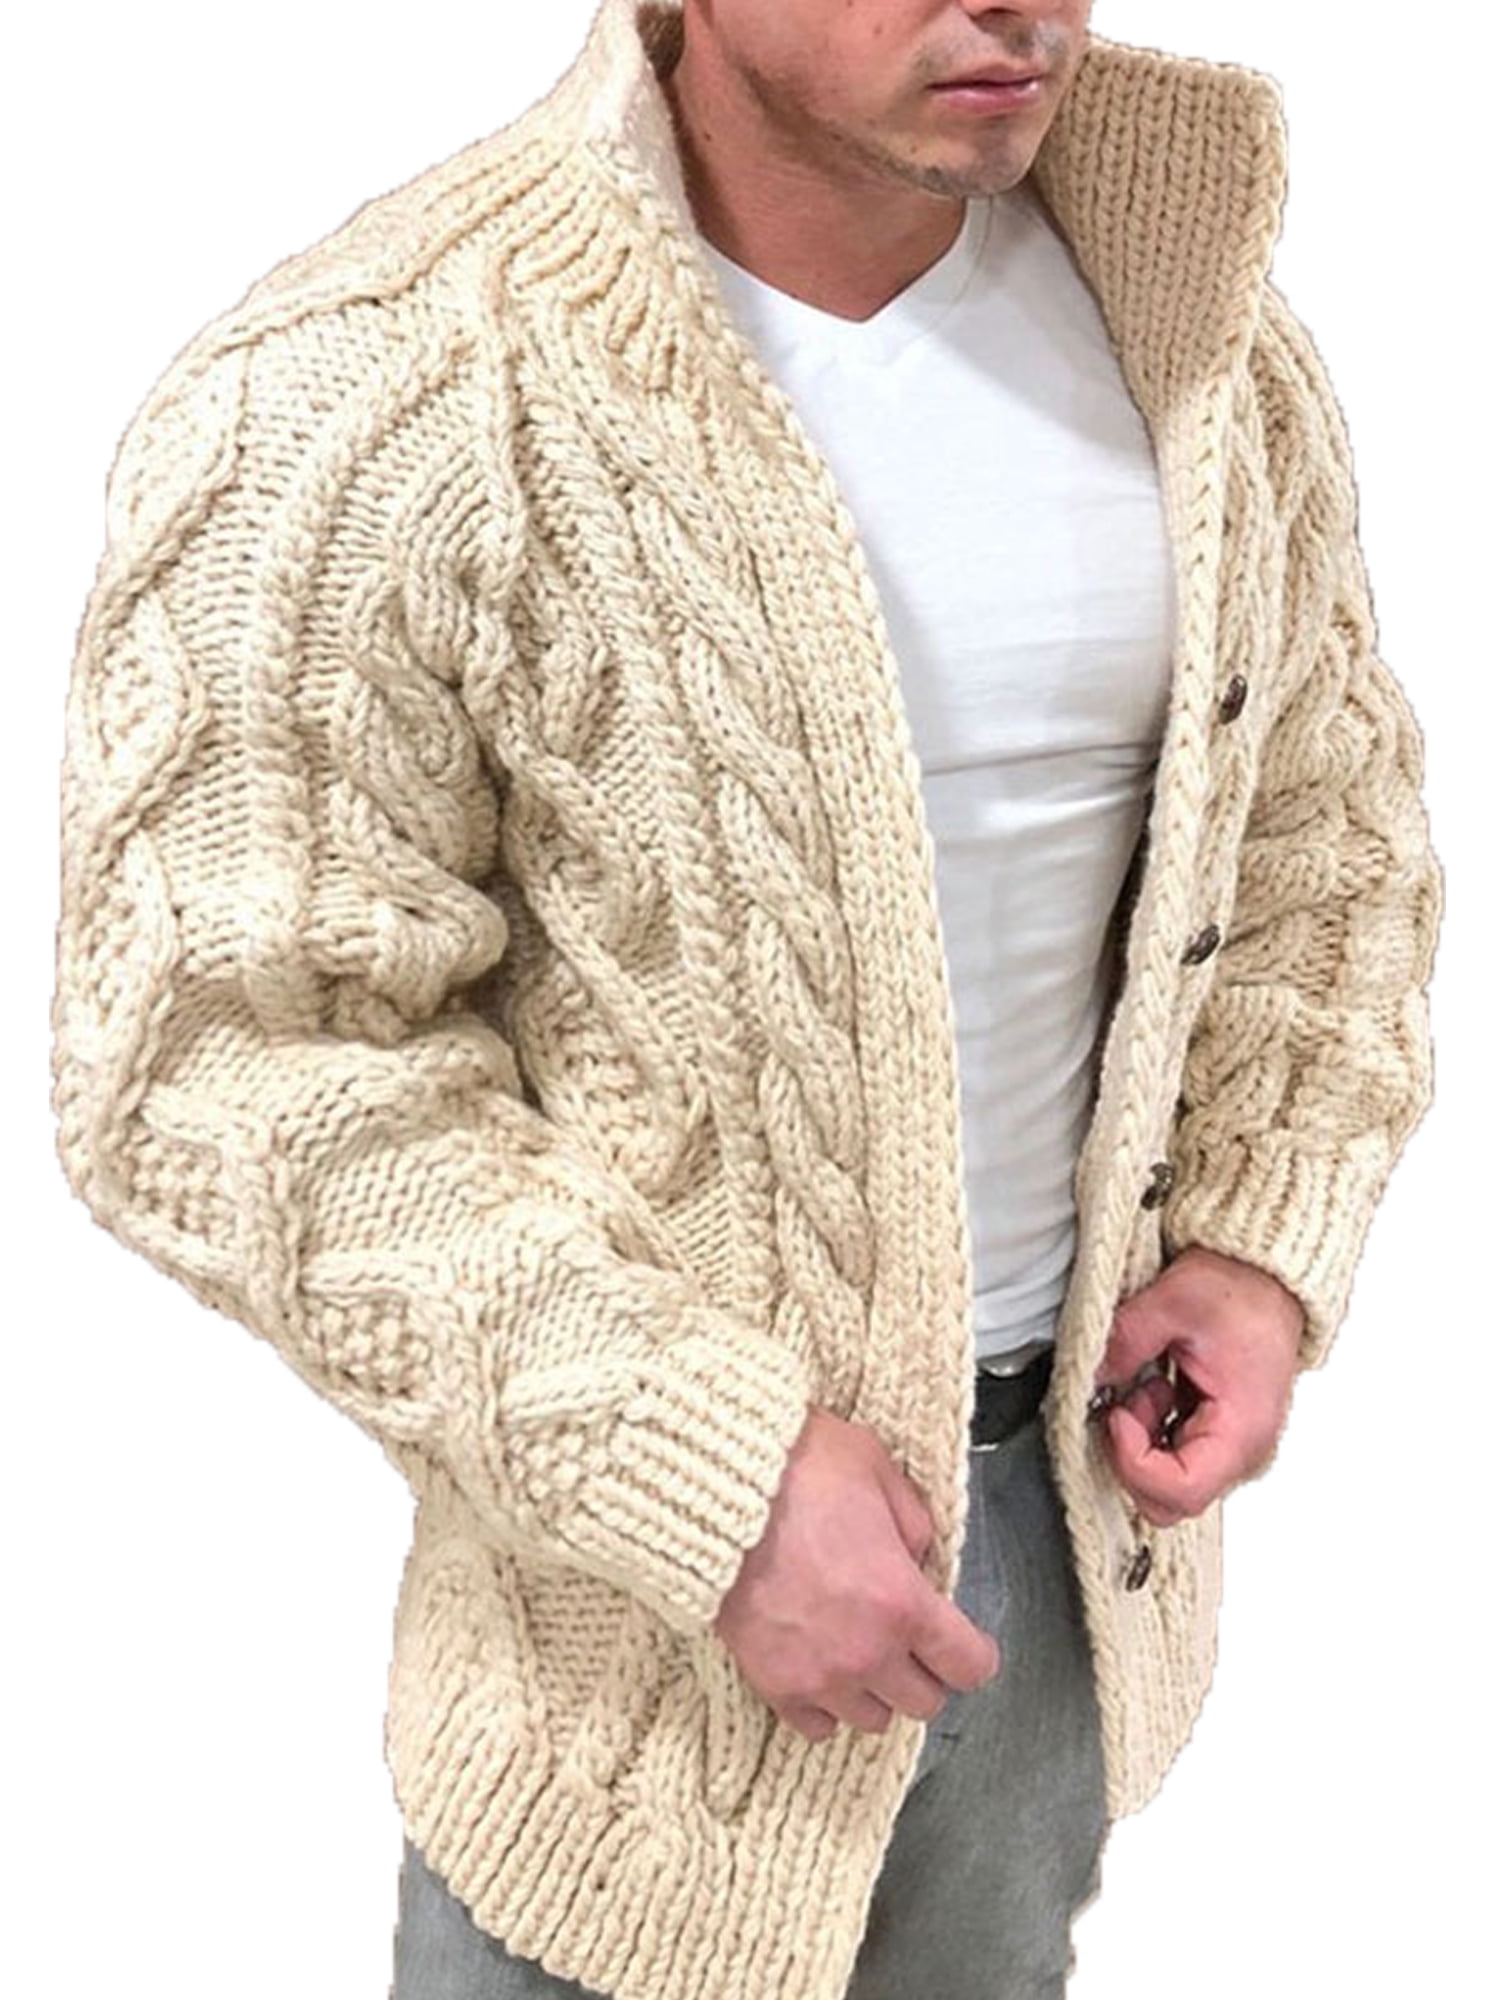 Mens Casual Slim Fit Cardigan Sweaters Full Zip Knitted Sweaters Outwear with Interior Plaid Pattern 